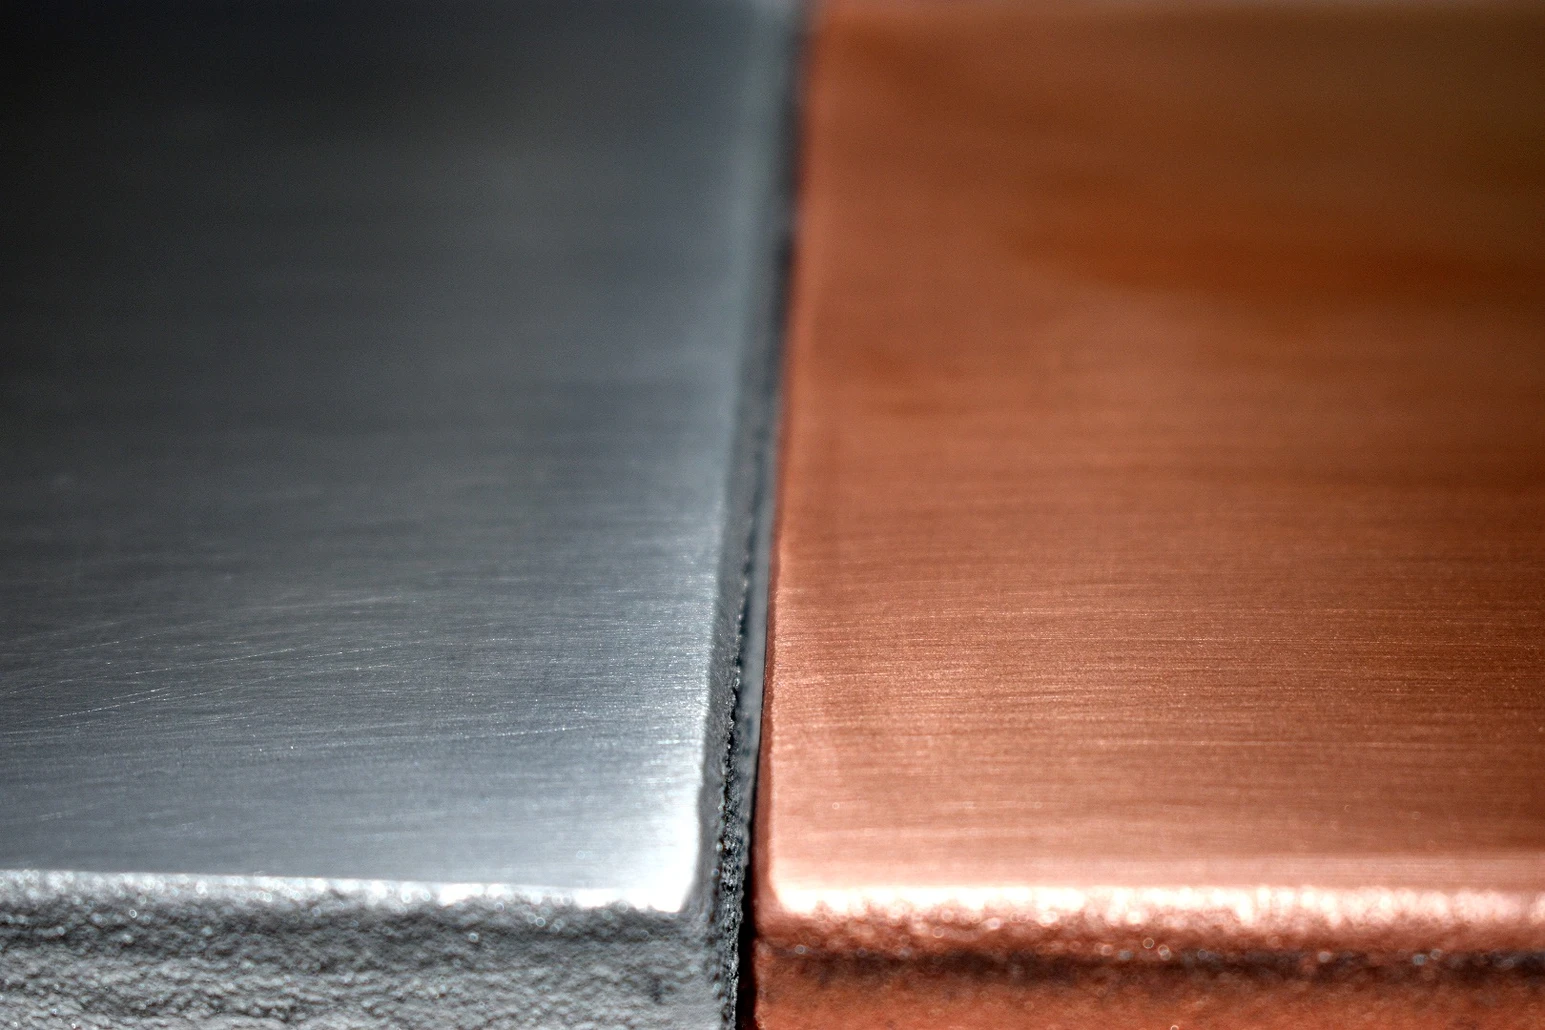 Rough Coatings Providing Rough Surfaces for Rough Environments